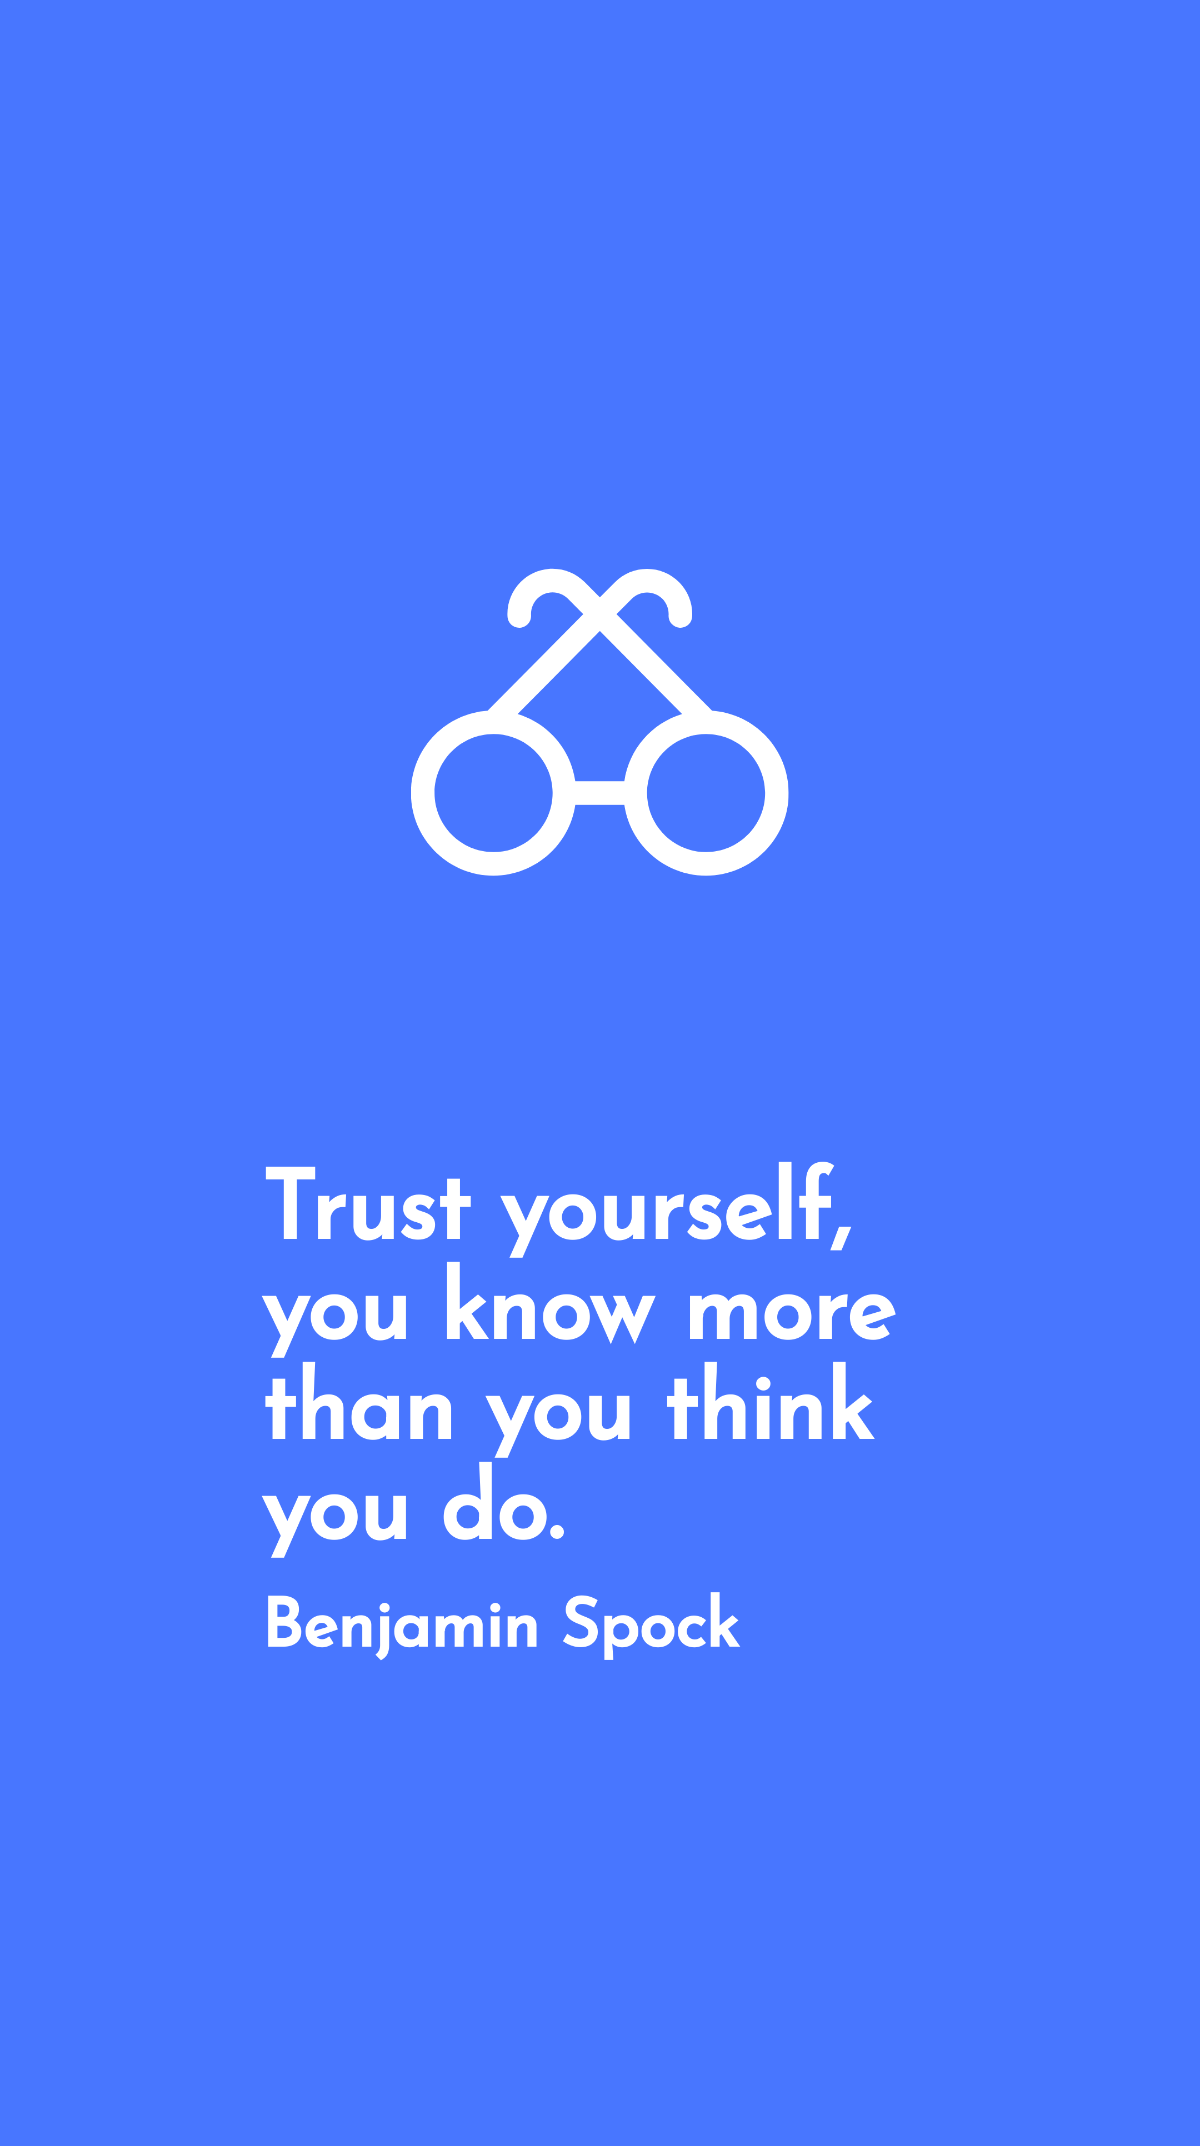 Benjamin Spock - Trust yourself, you know more than you think you do.